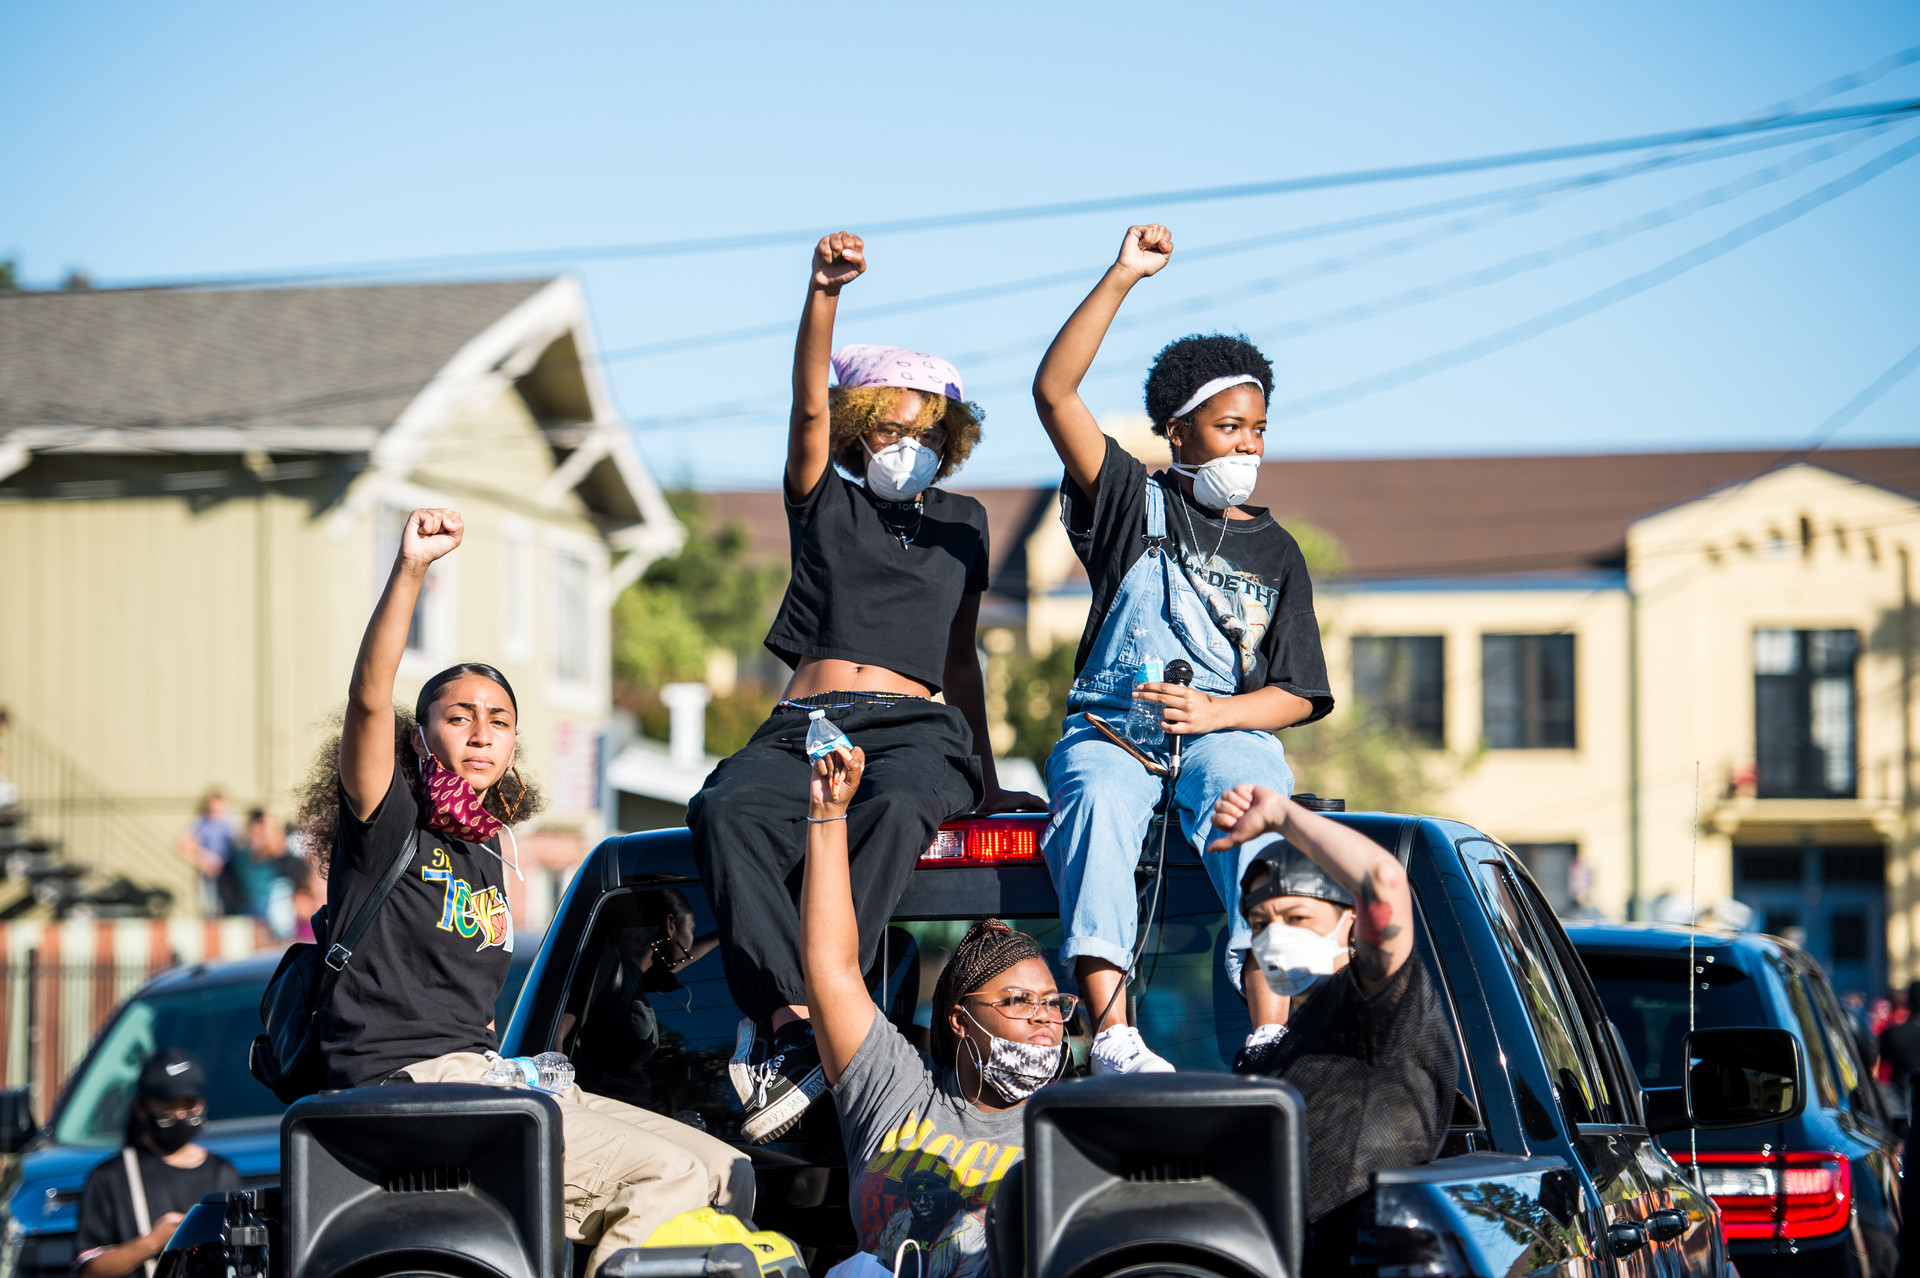 Isha Clarke (left) and other members of Oakland Black Youth Activists take part in a march for Erik Salgado, who was shot and killed by California Highway Patrol officers on June 6.